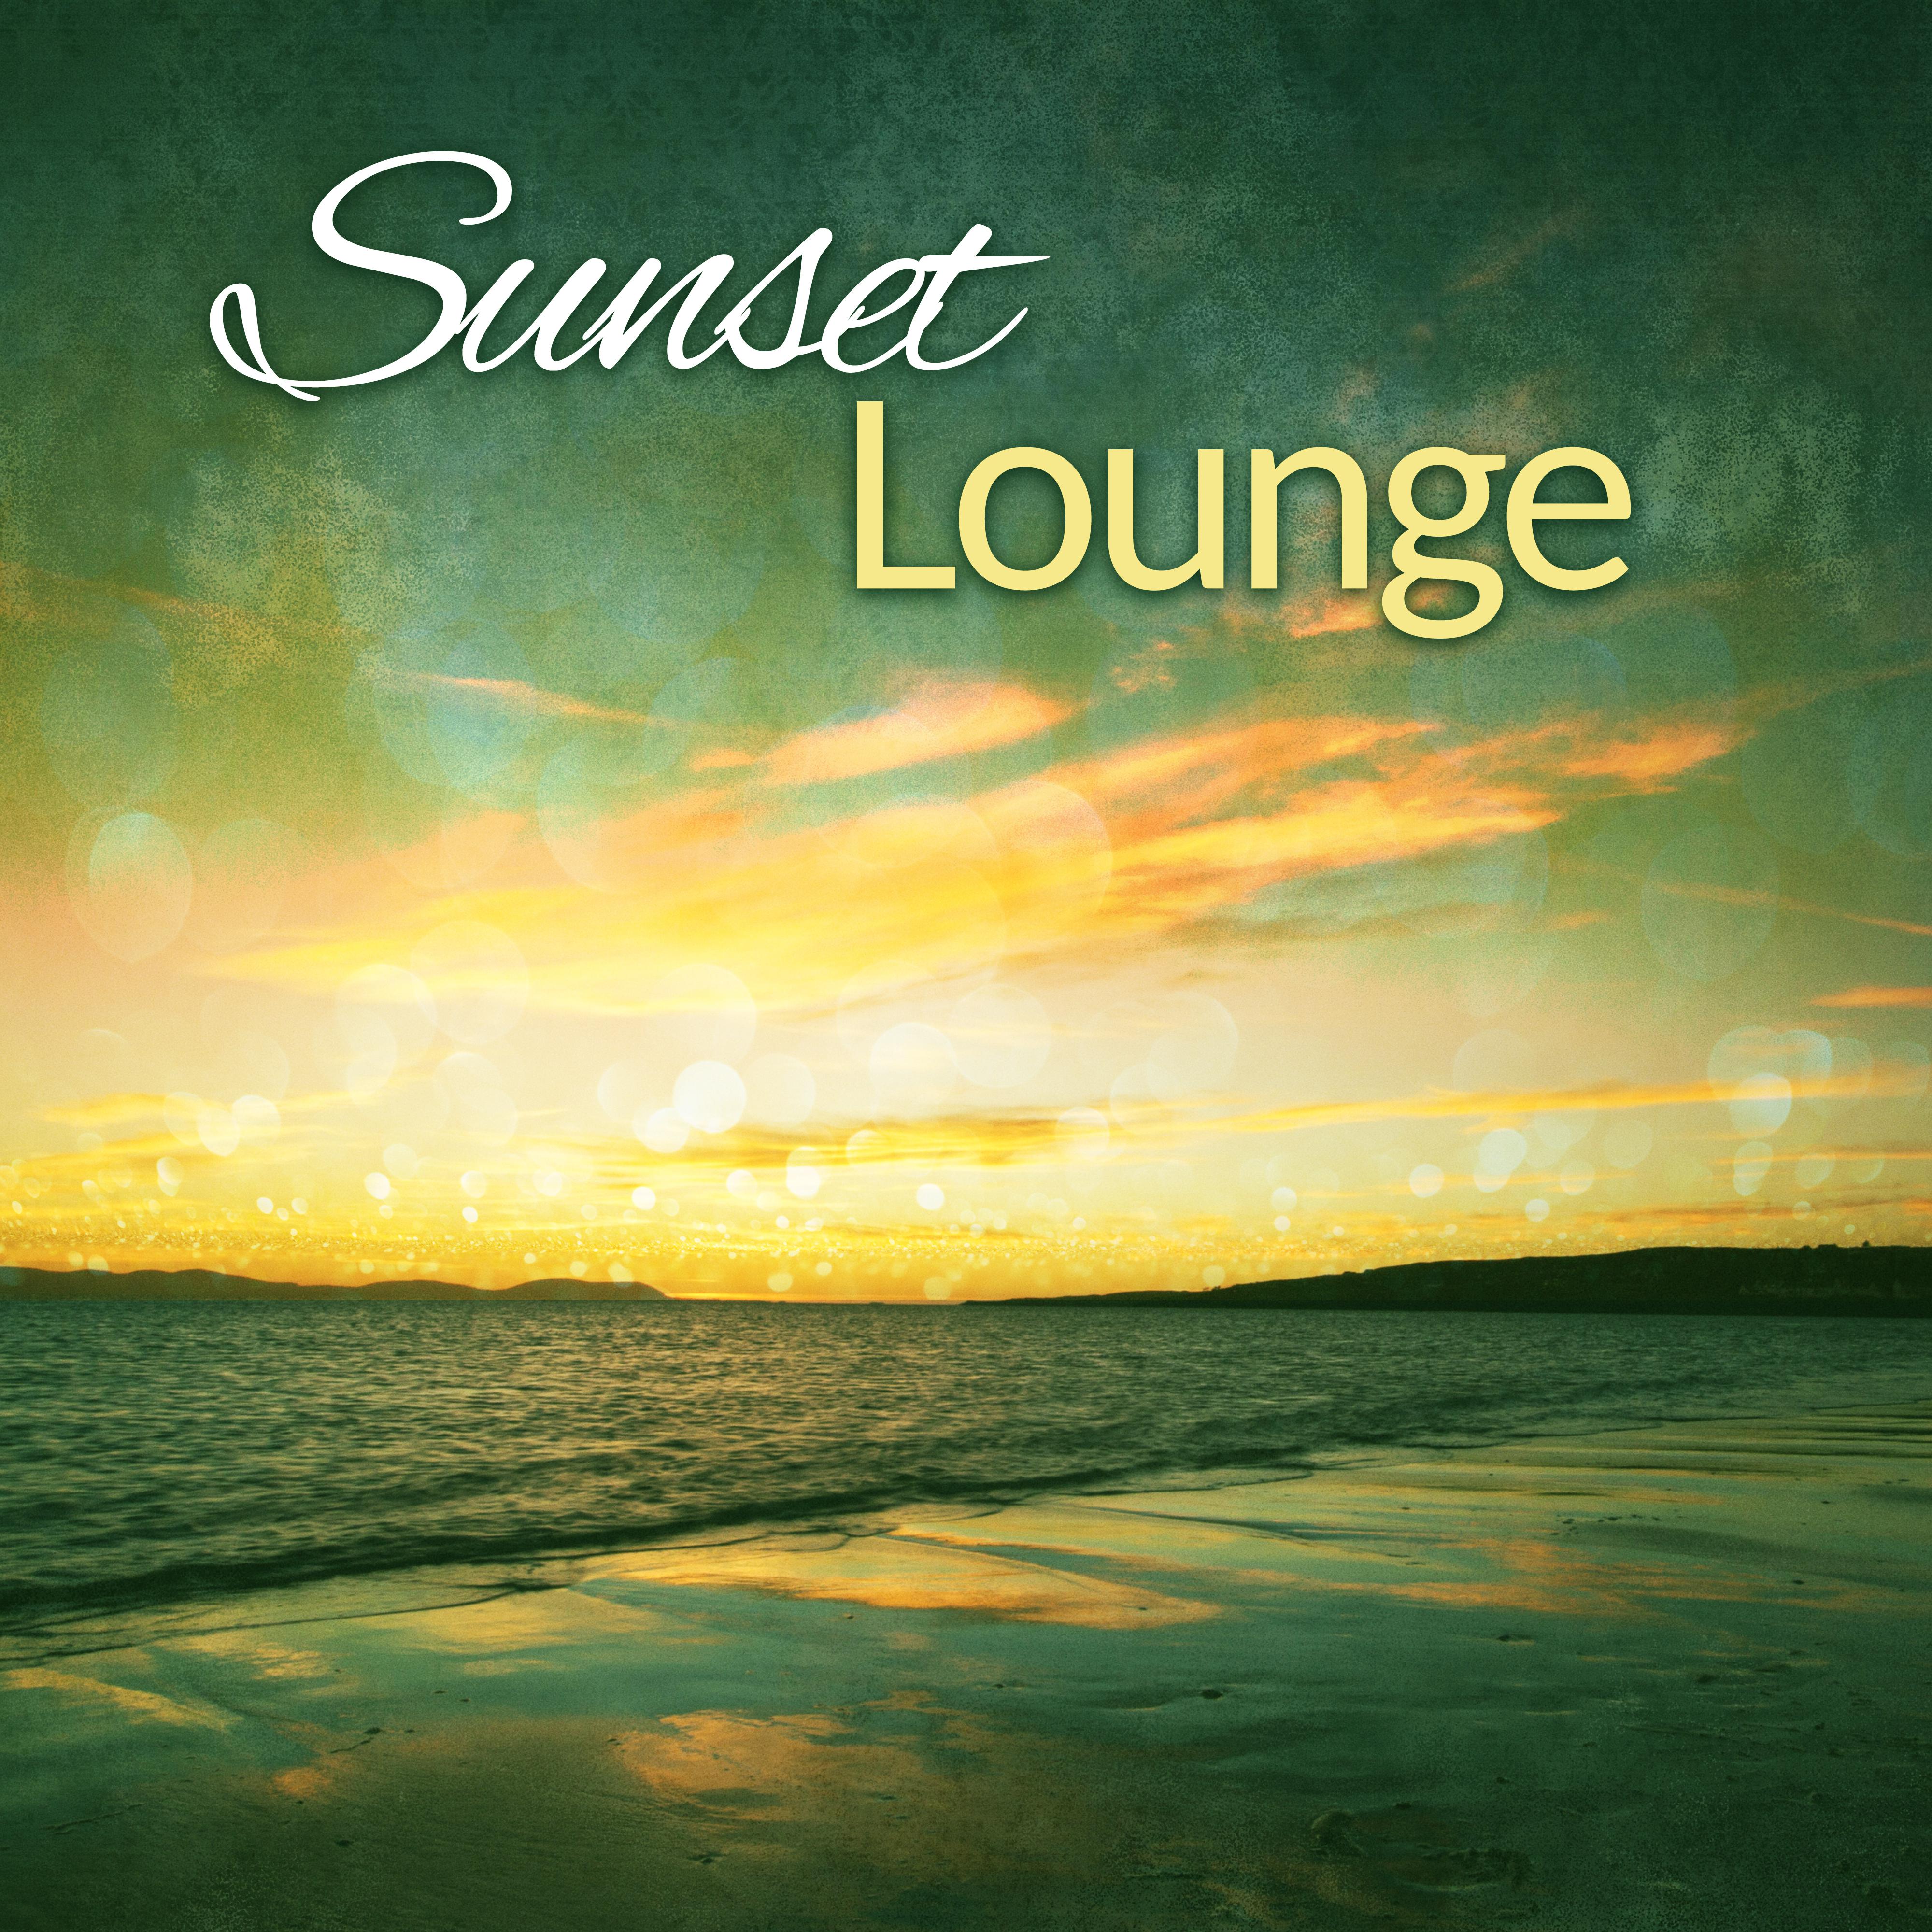 Sunset Lounge  Relaxing Beach Music, Sunrise, Chill Out Music, Soft Sounds